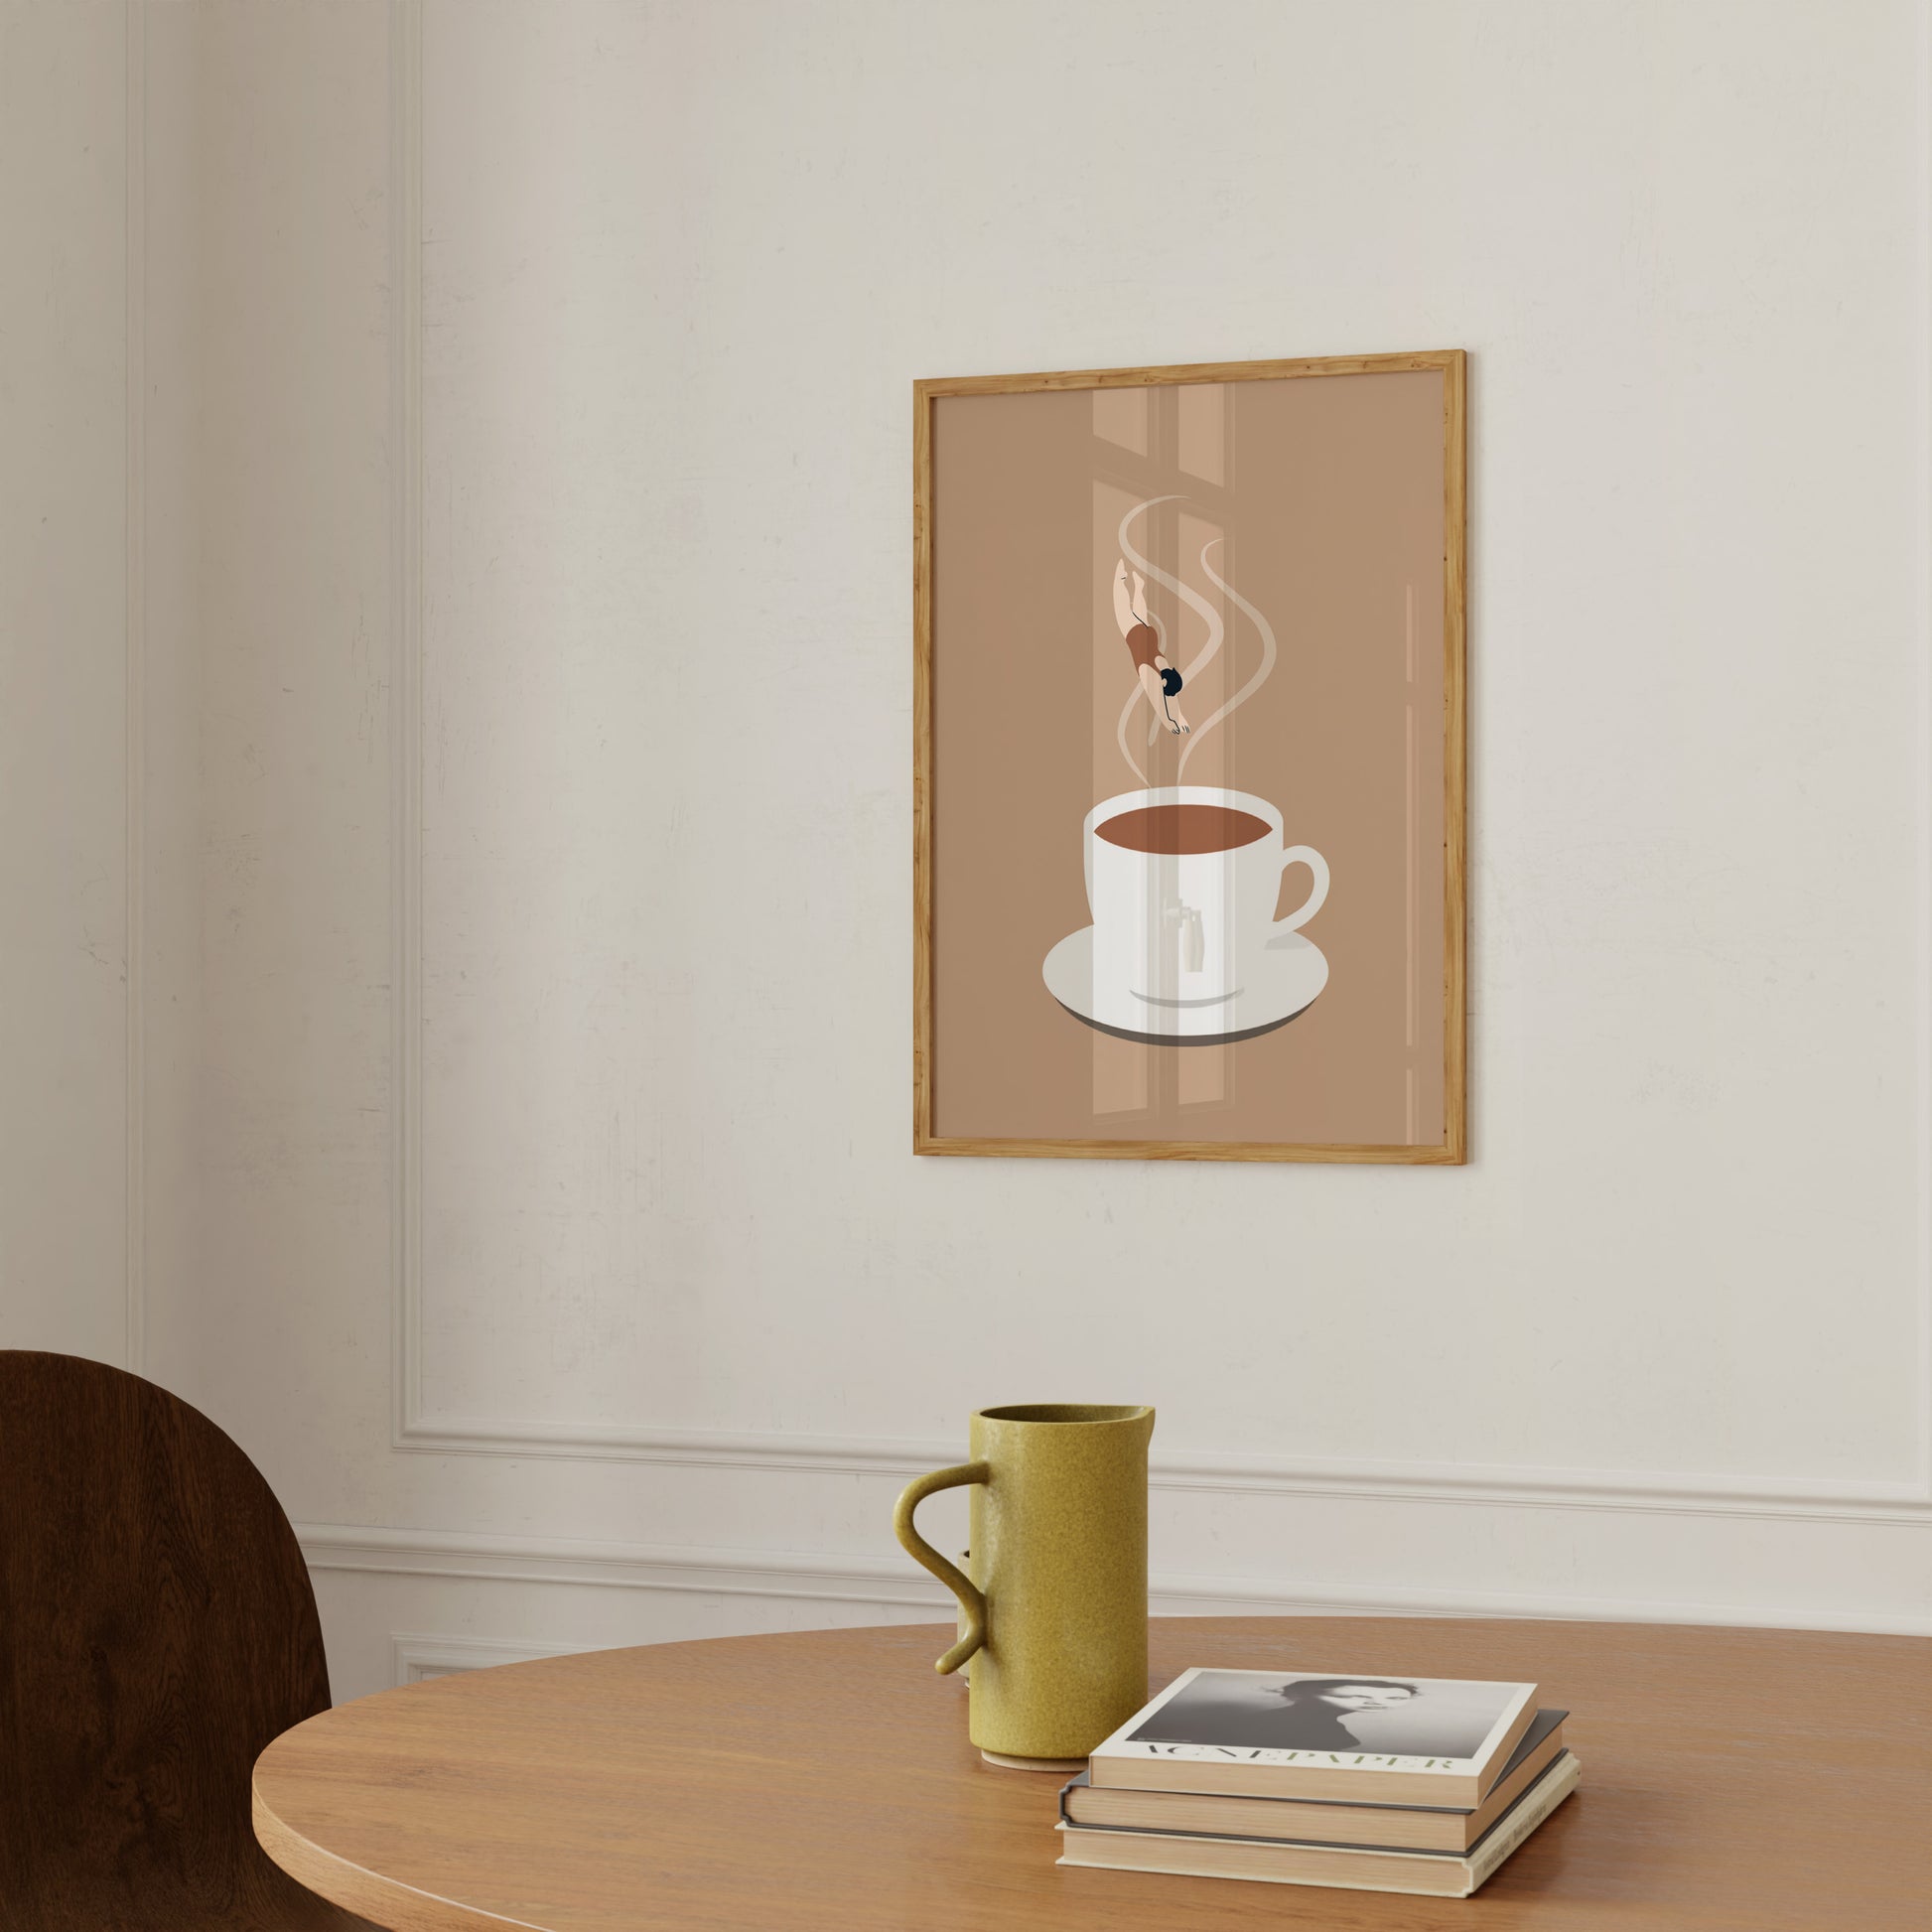 A framed poster of a coffee cup above a mug and book on a wooden table.